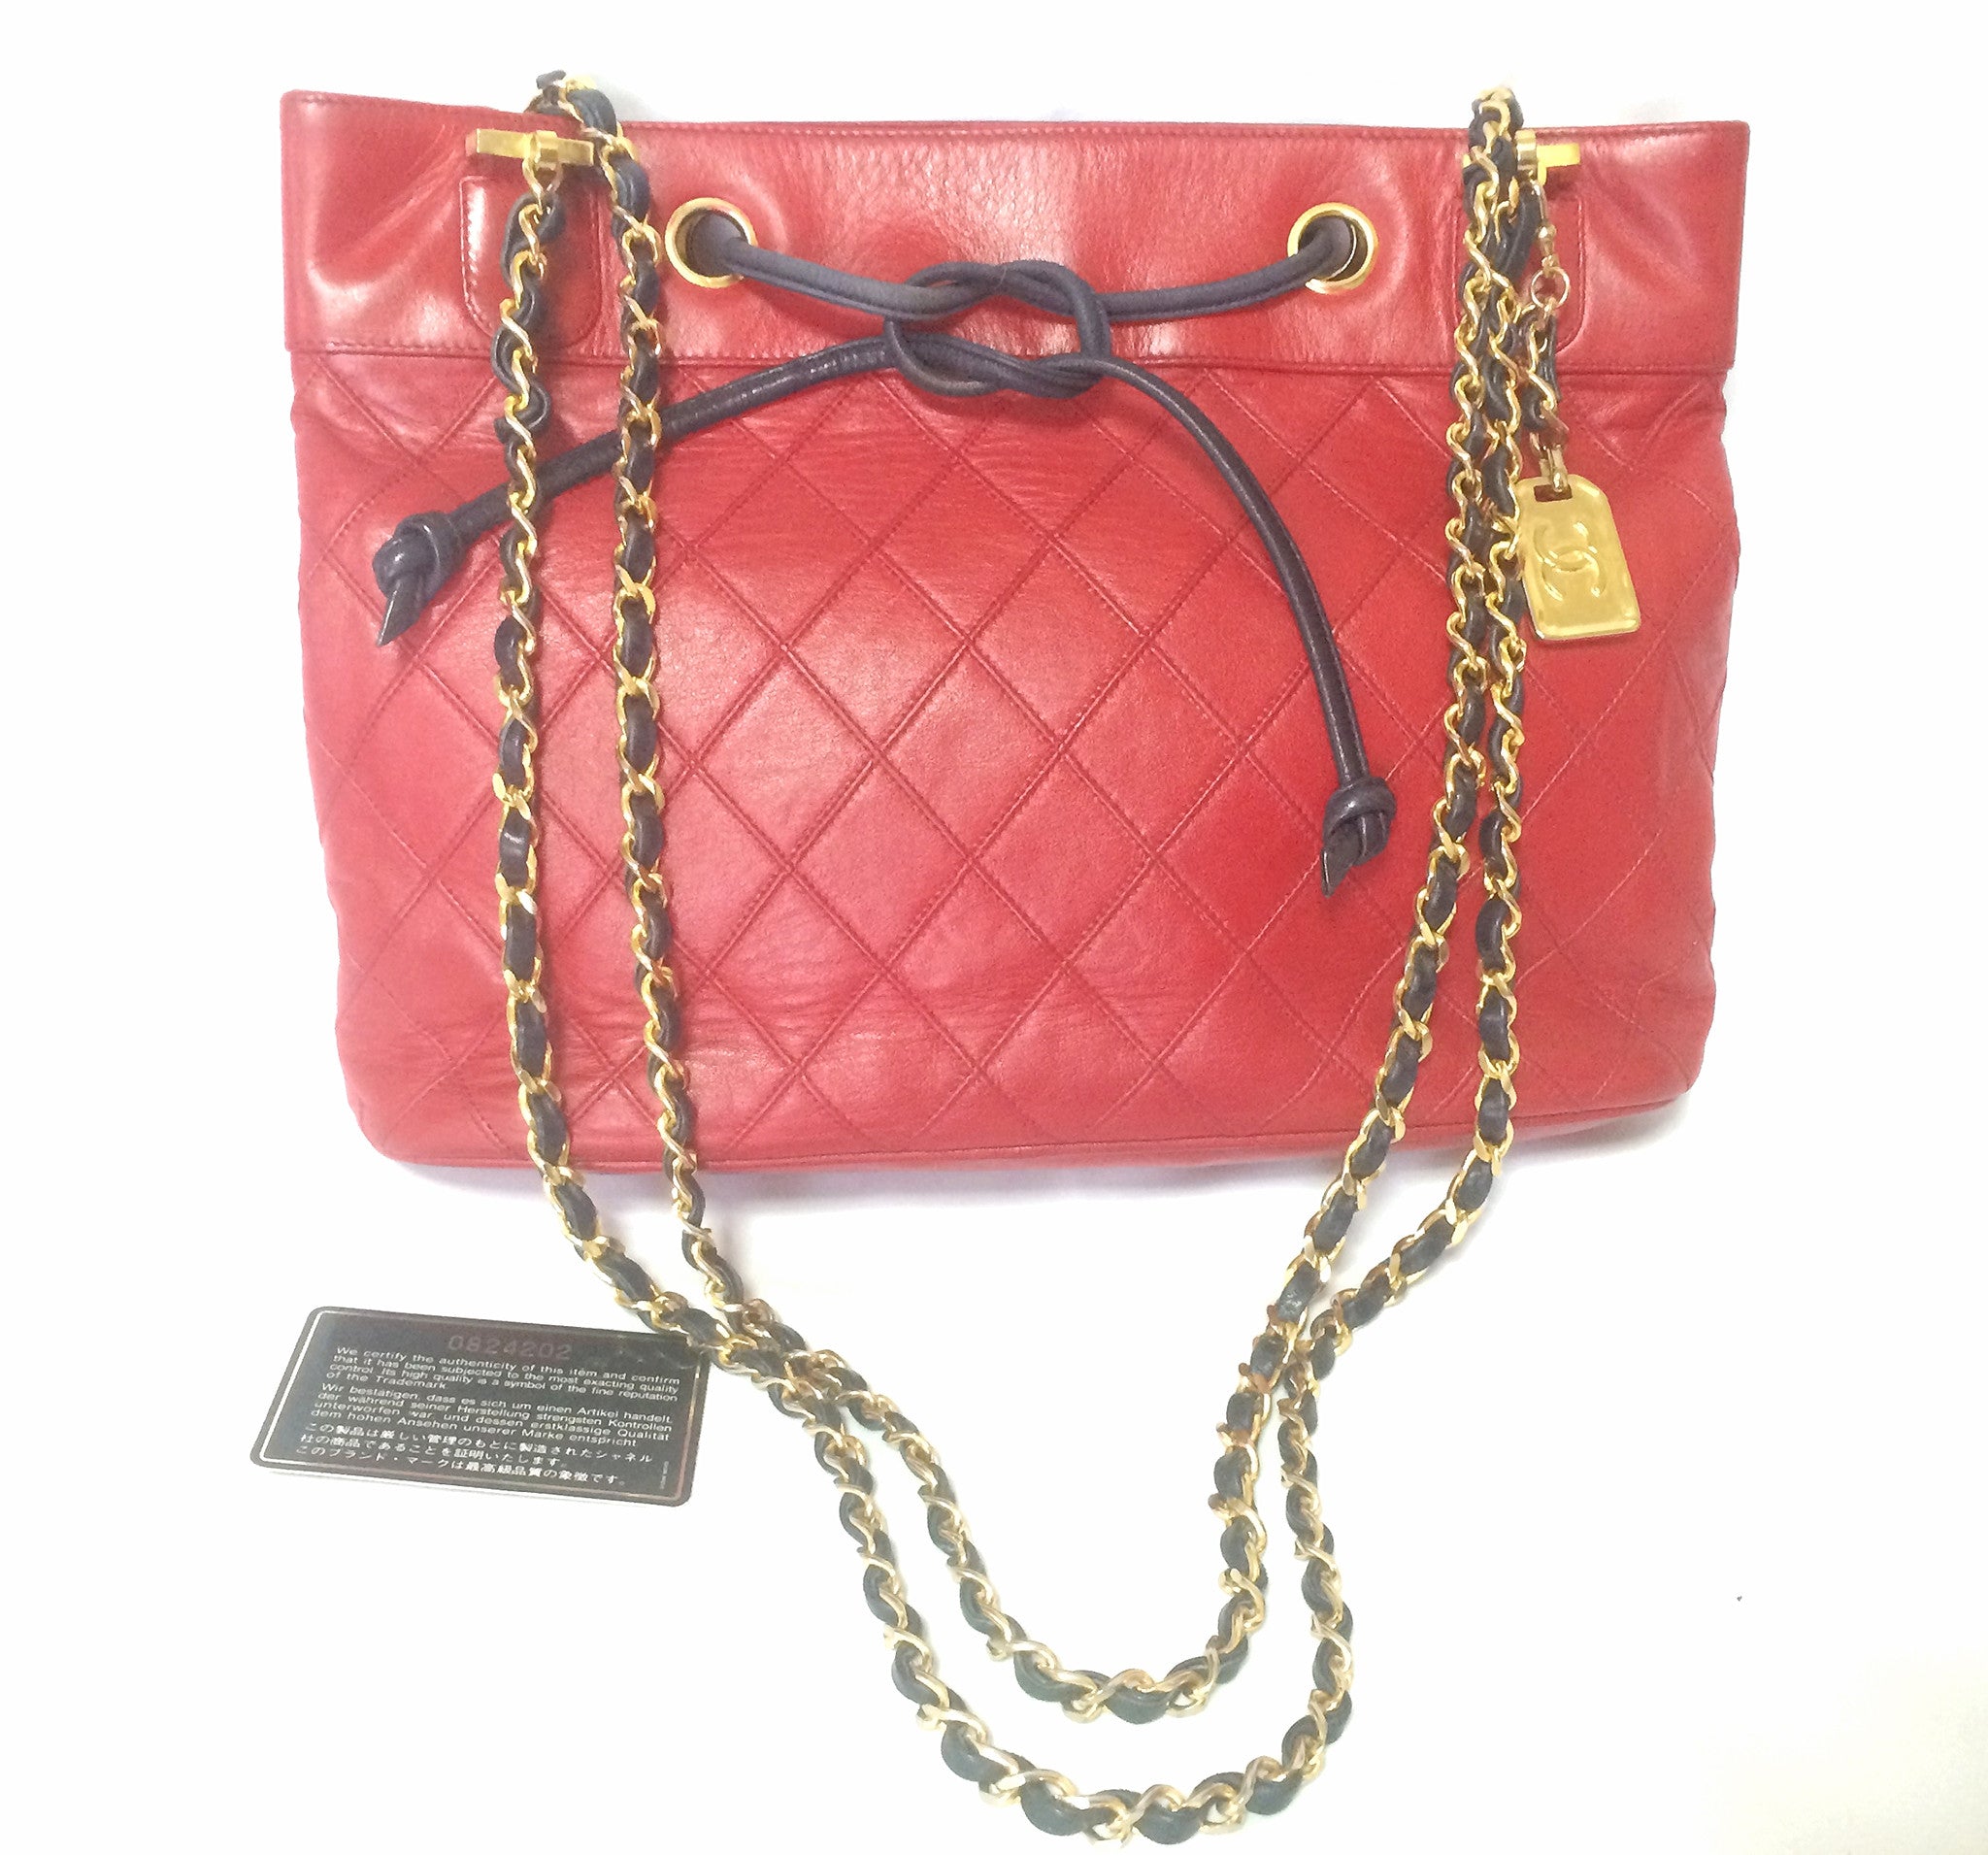 Chanel Bright Red Lizard Mini Flap Bag with Gold Chain Strap   Lot  64135  Heritage Auctions